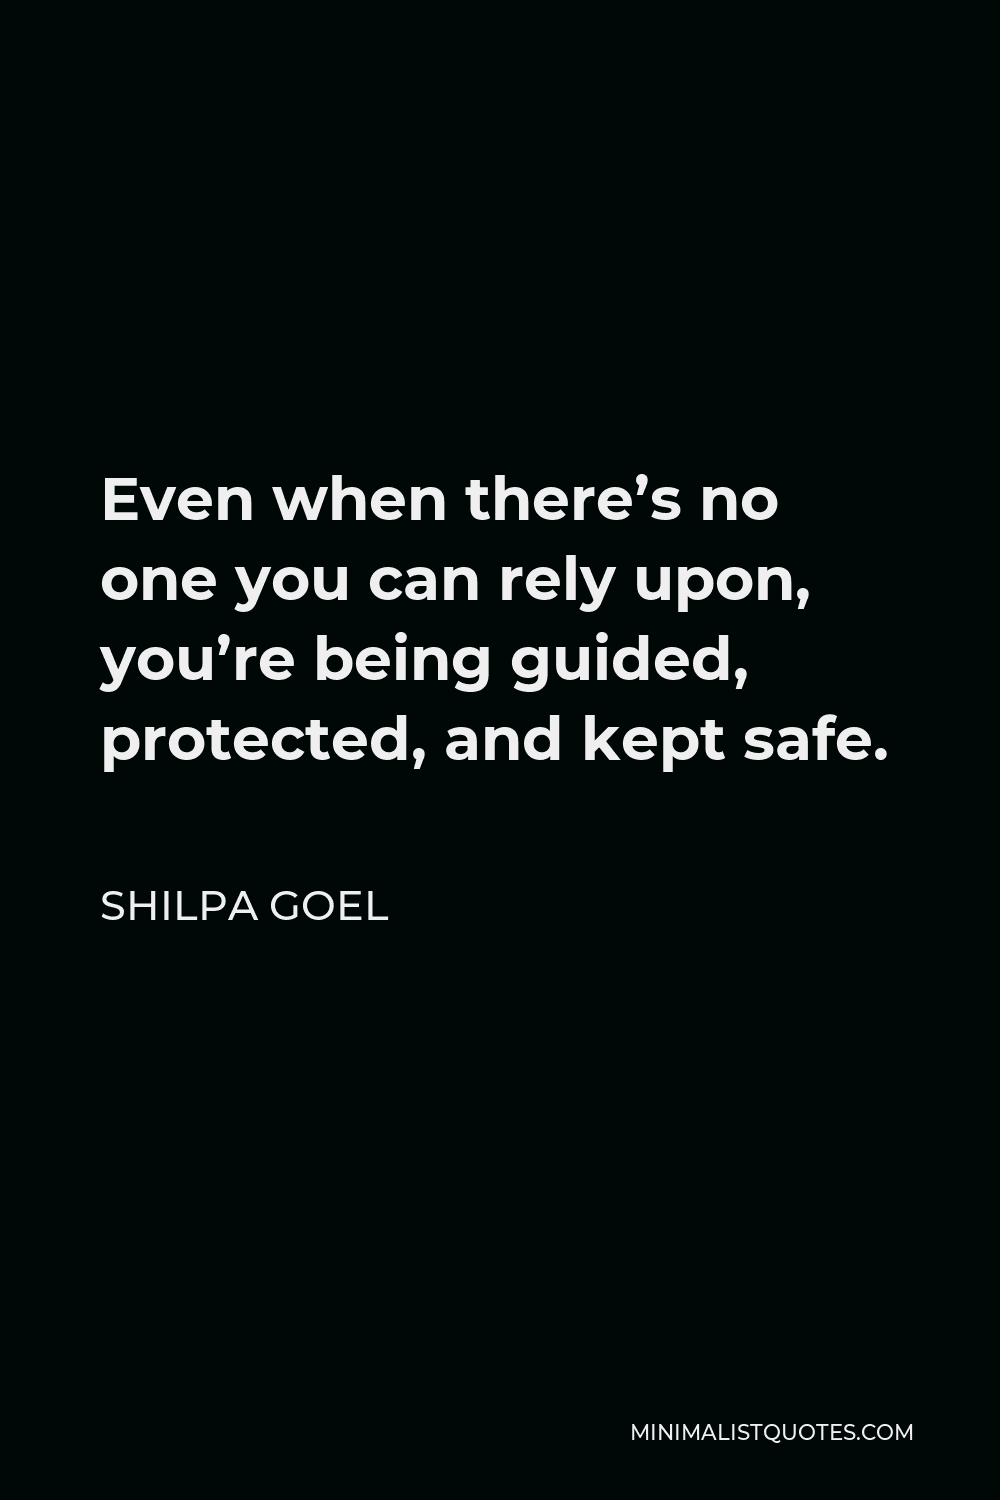 Shilpa Goel Quote - Even when there’s no one you can rely upon, you’re being guided, protected, and kept safe.